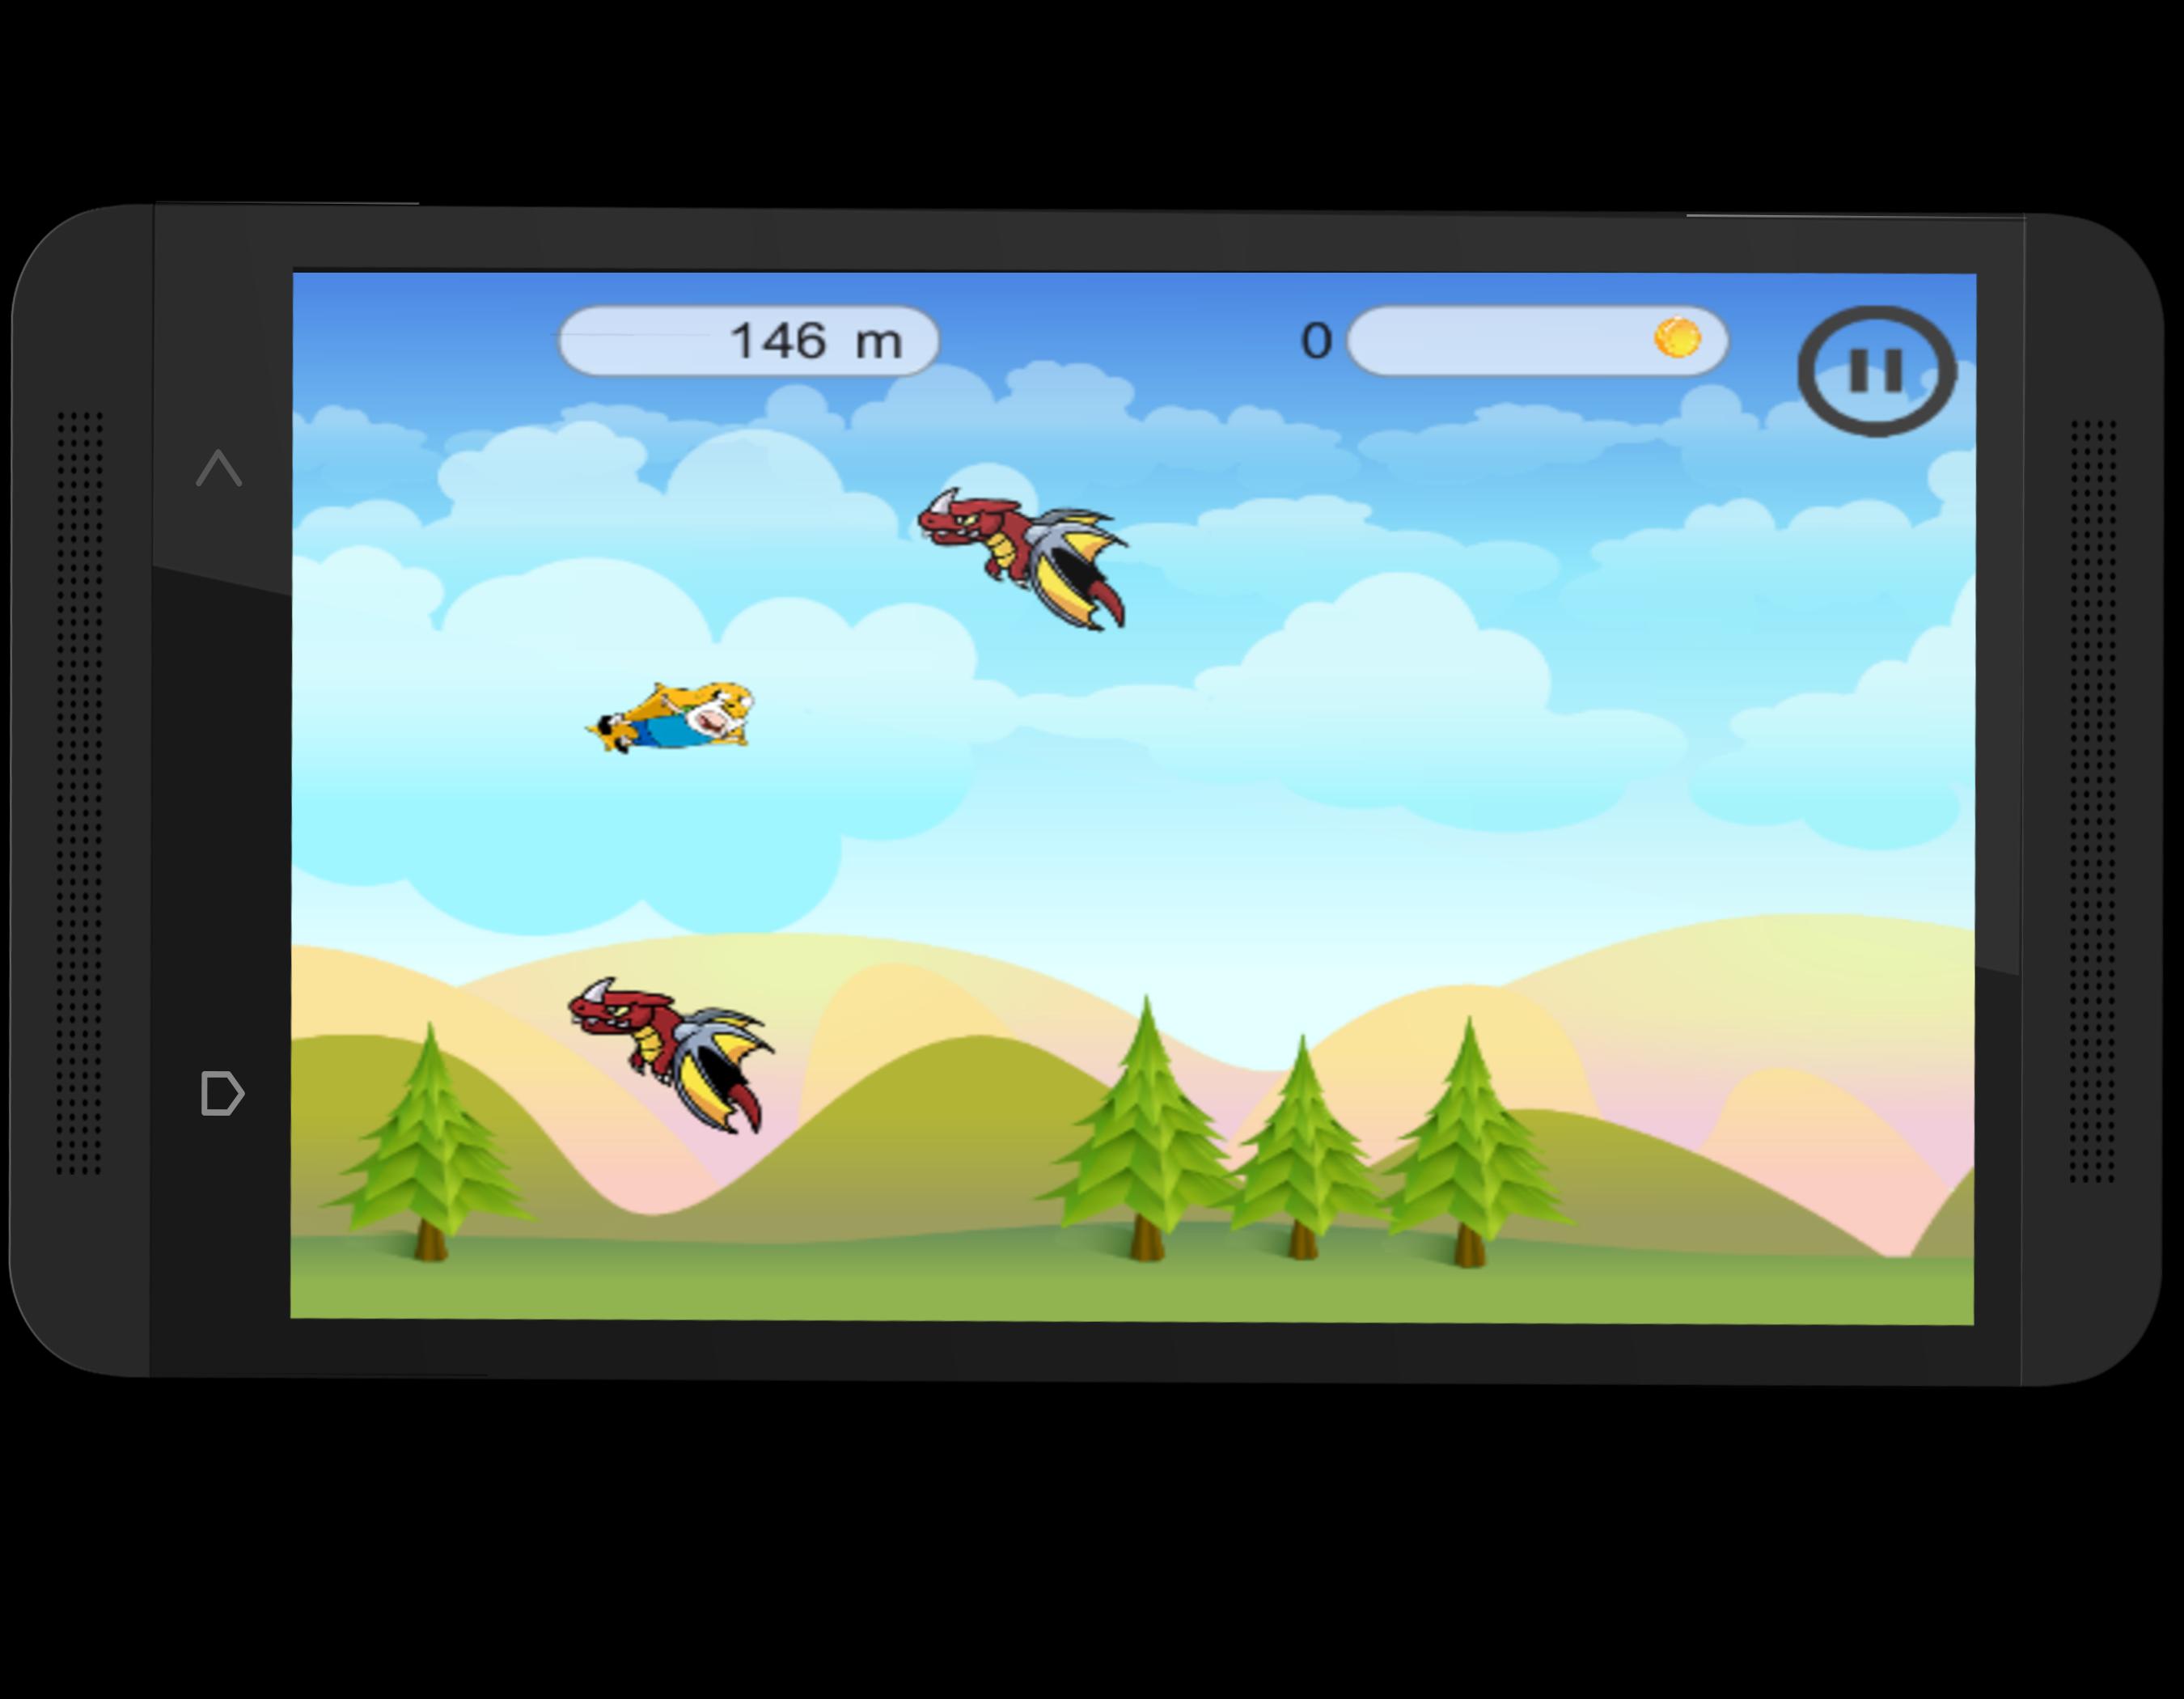 Джангл адвентура игра. Fly Jungle Adventure. Flying Screen. Millies Adventure download Android. Jungle time